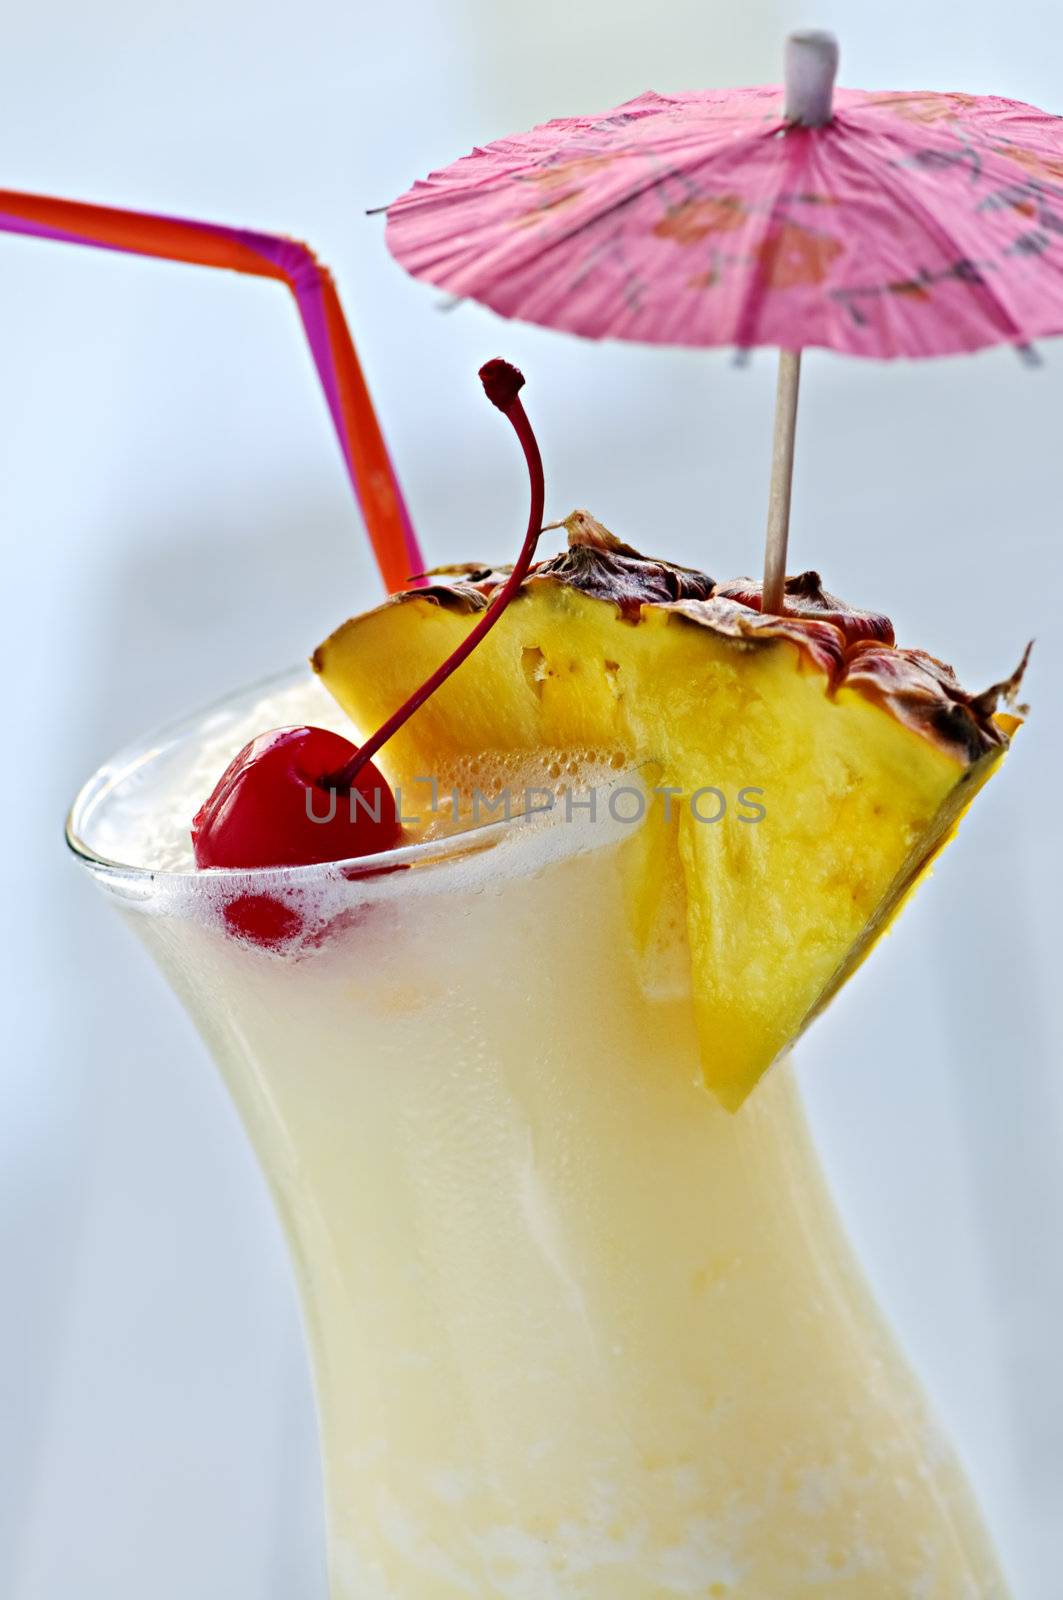 Pina colada drink in hurricane cocktail glass isolated on white background